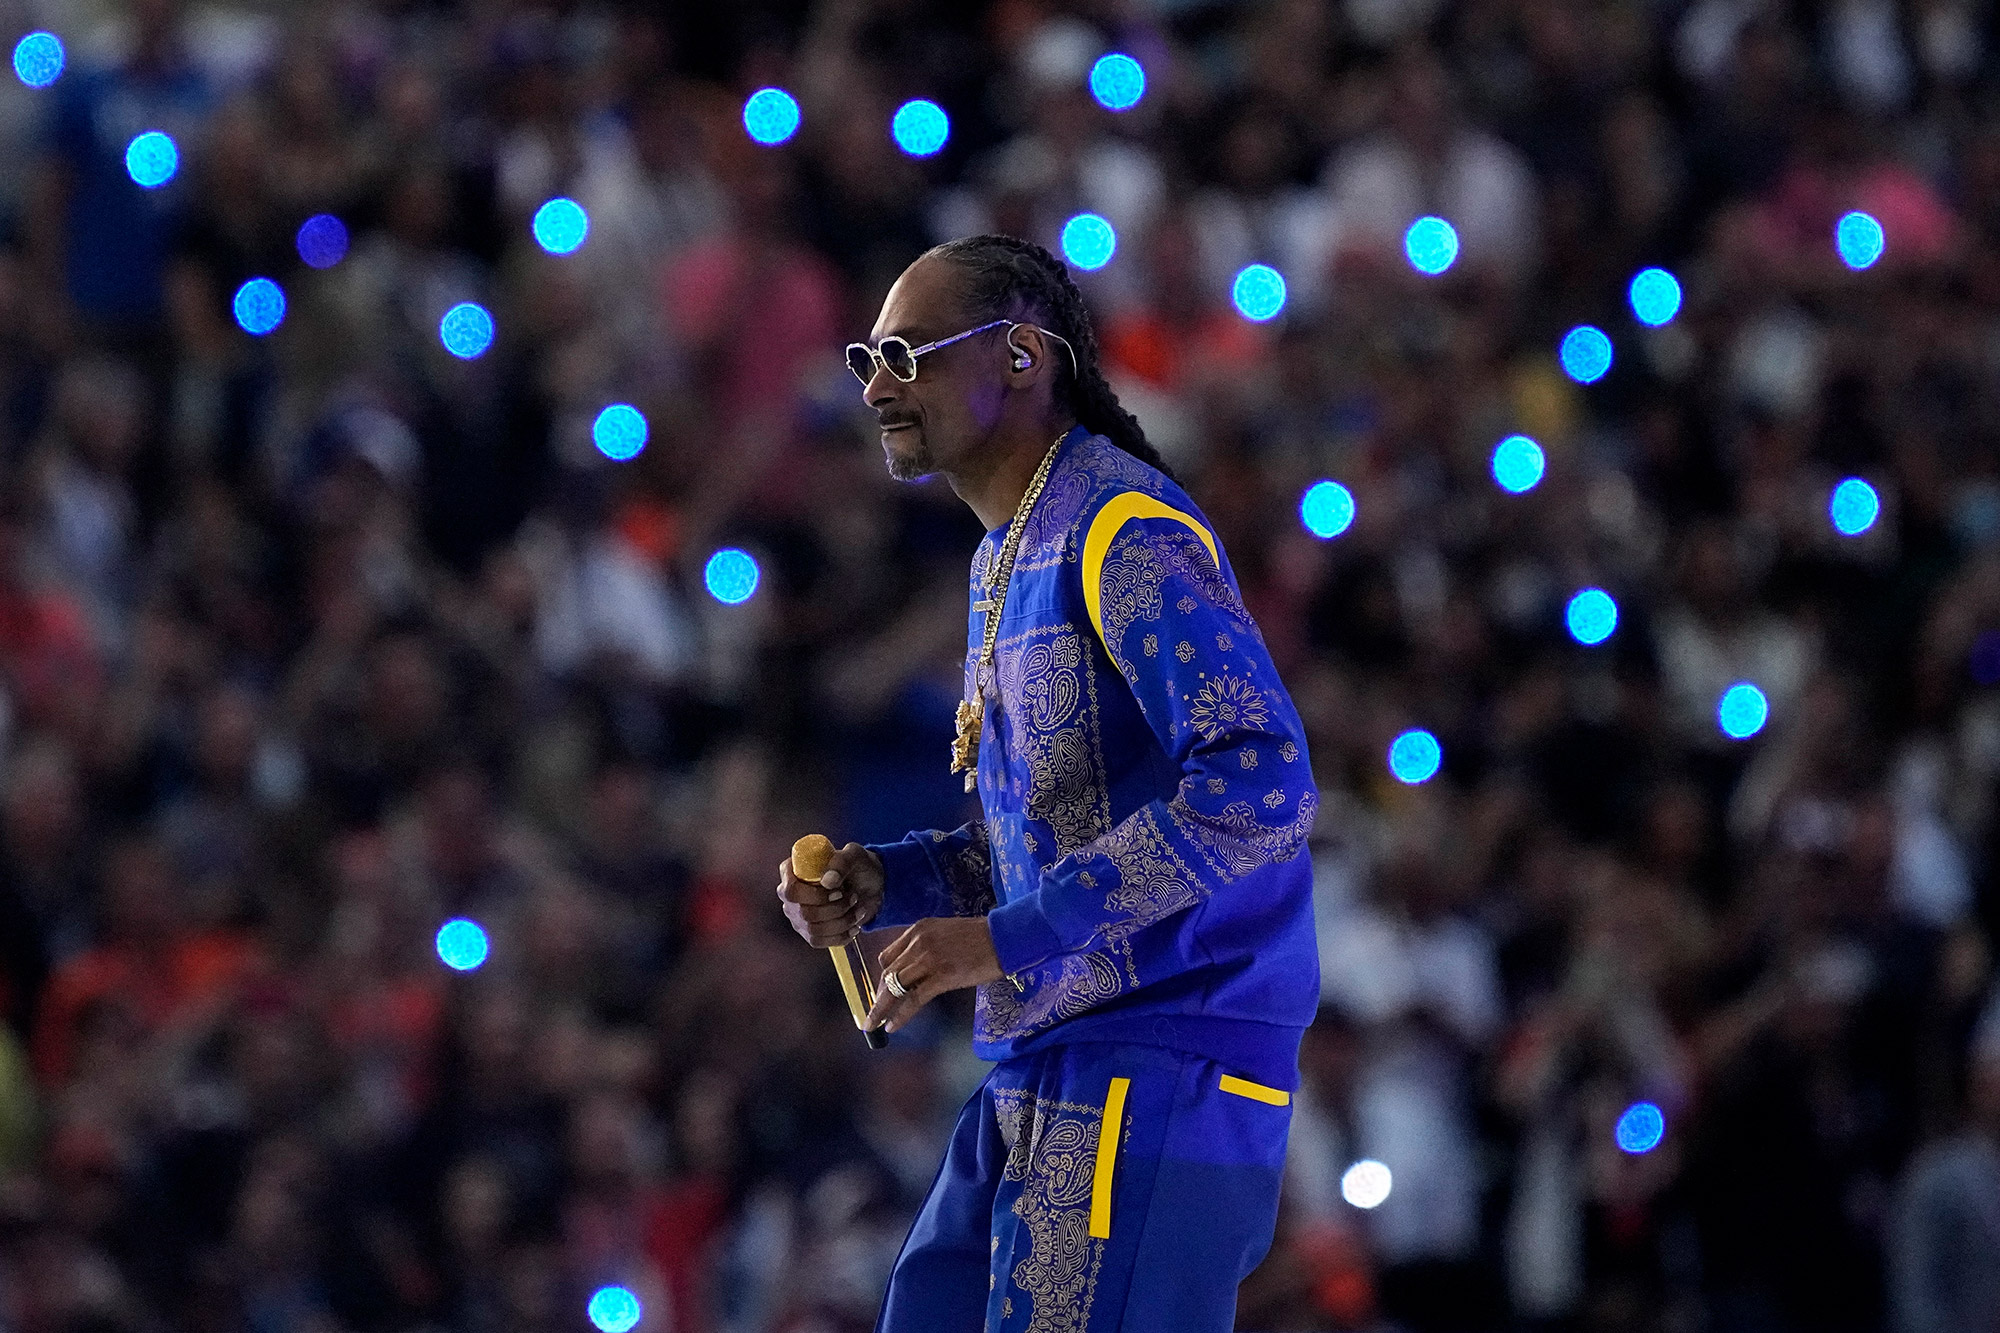 Snoop Dogg performs during the halftime show.